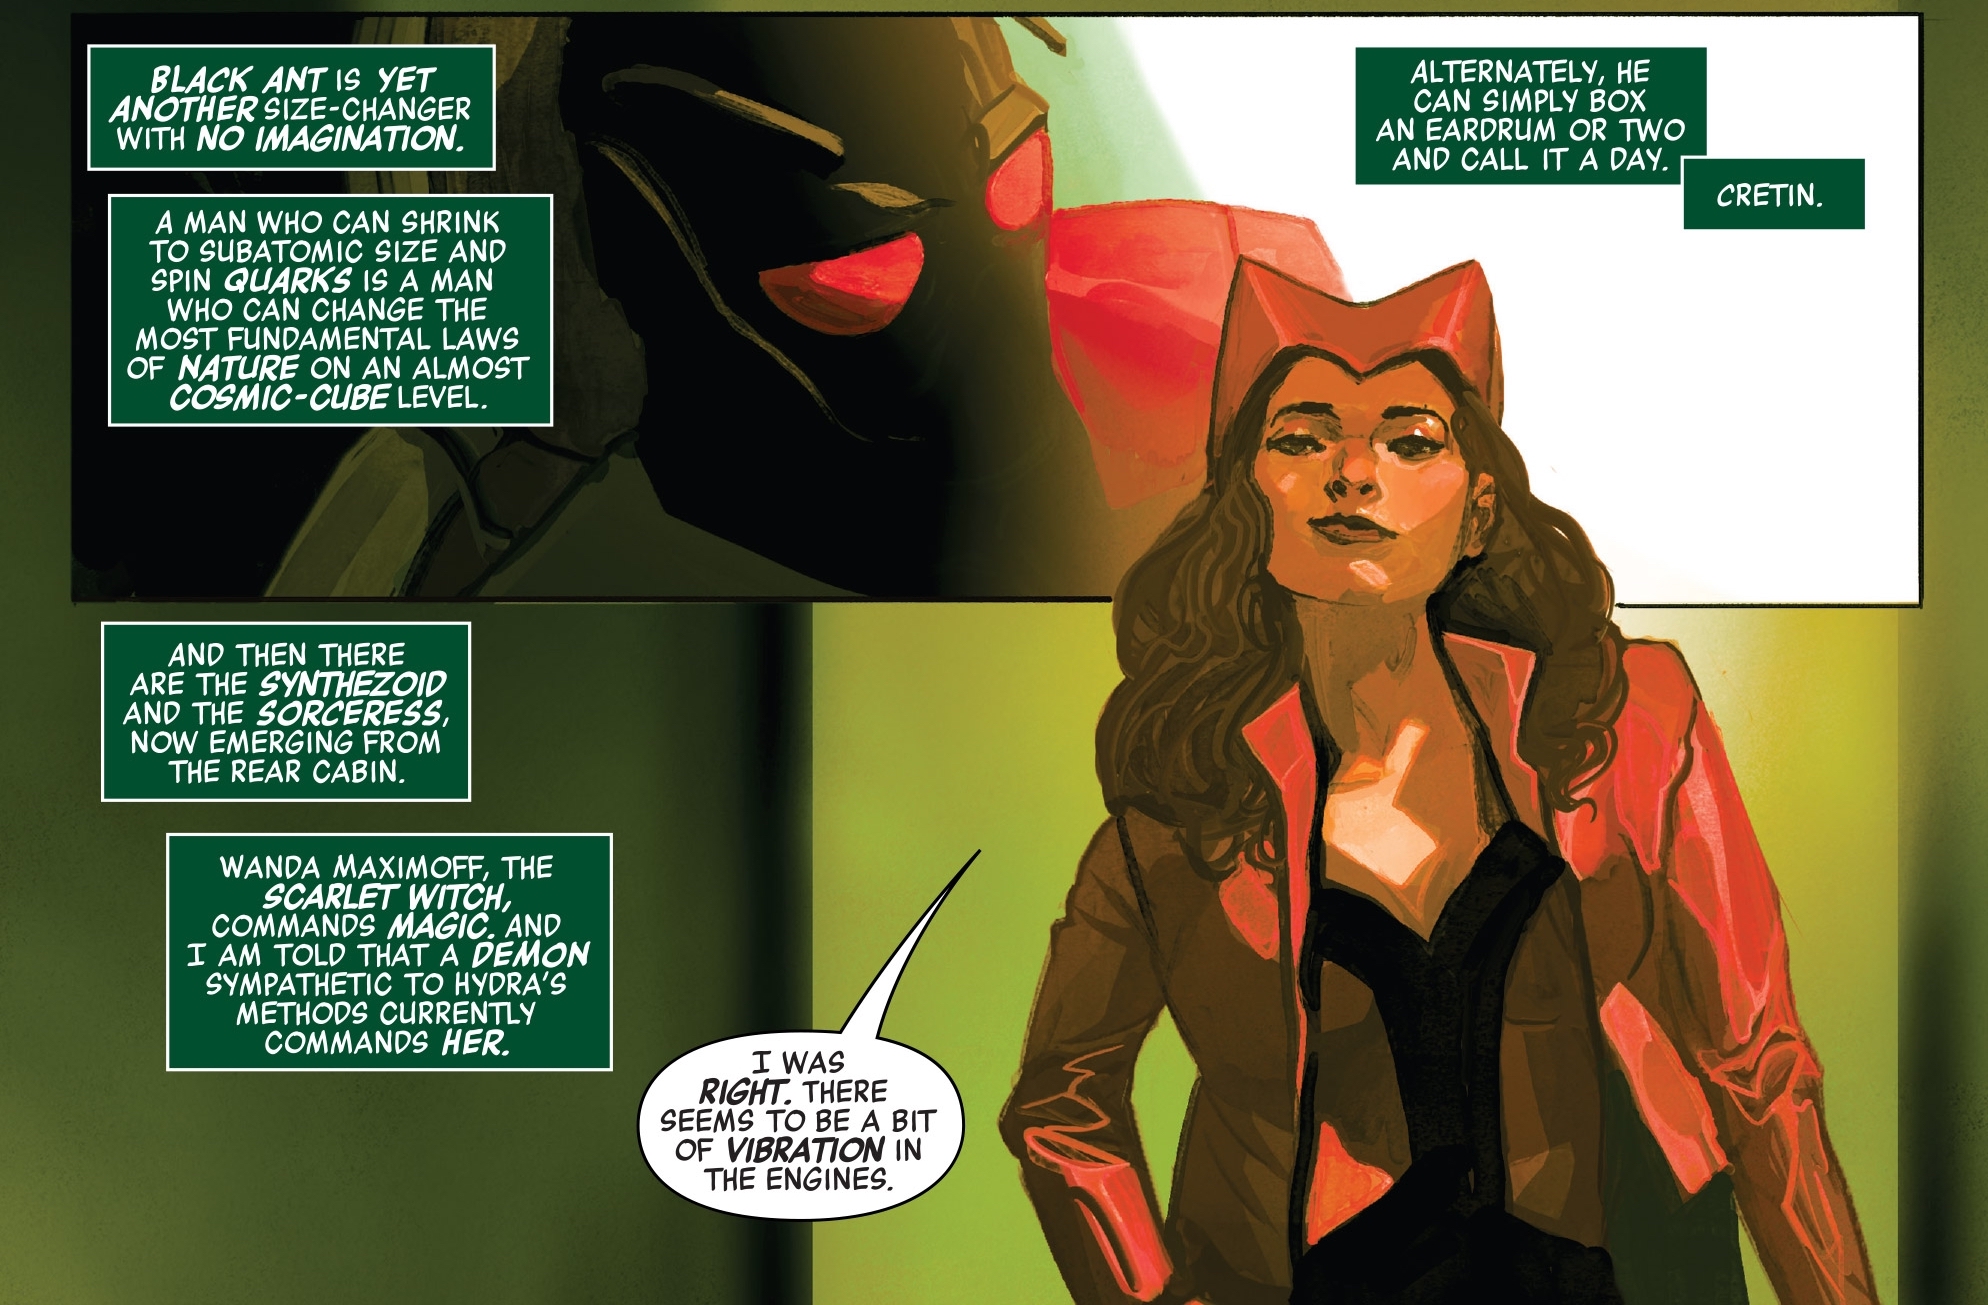 Secret Empire Just Took the Scarlet Witch And Vision’s Relationship To An Even Darker, More Dysfunctional Place